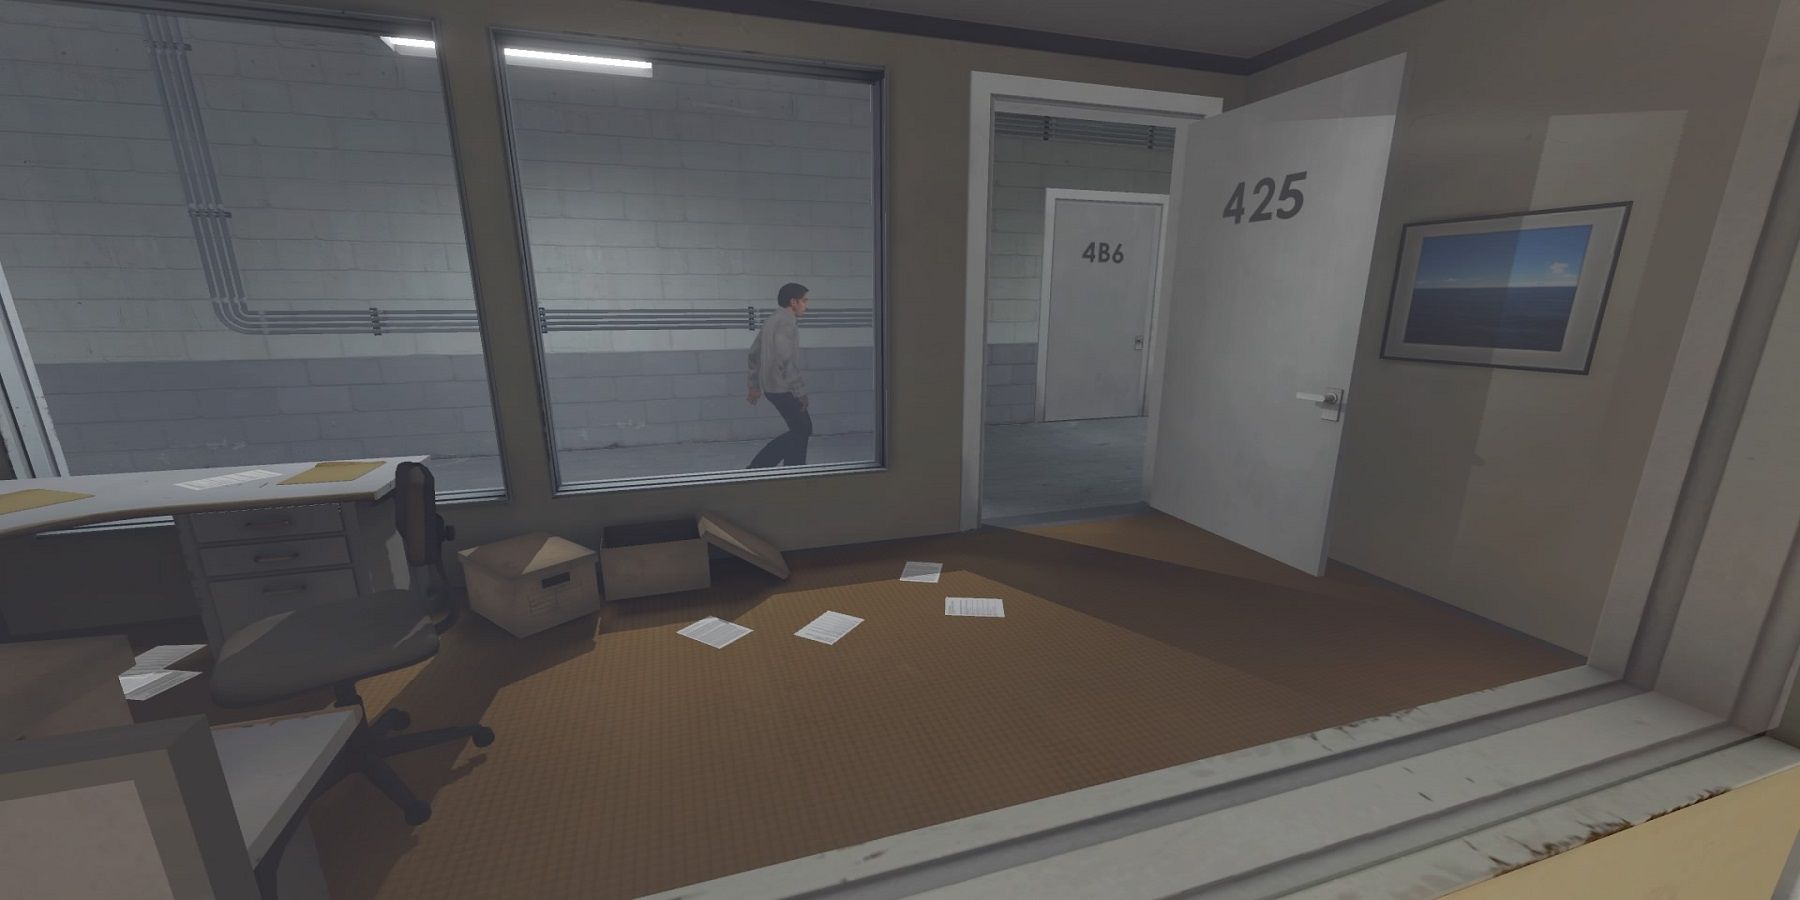 The Stanley Parable - Ultra Deluxe Employee